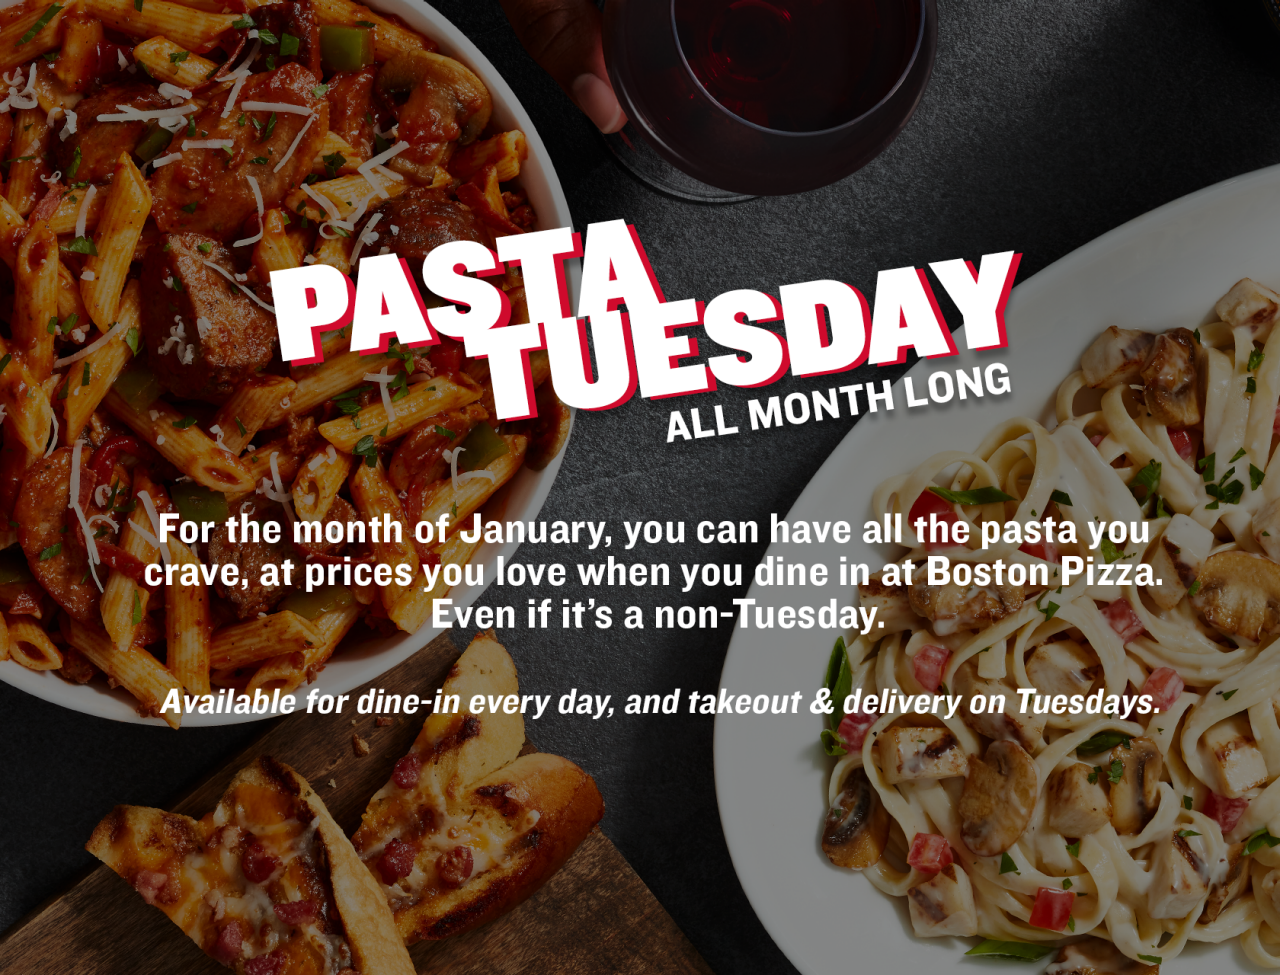 Pasta Tuesday All Month Long